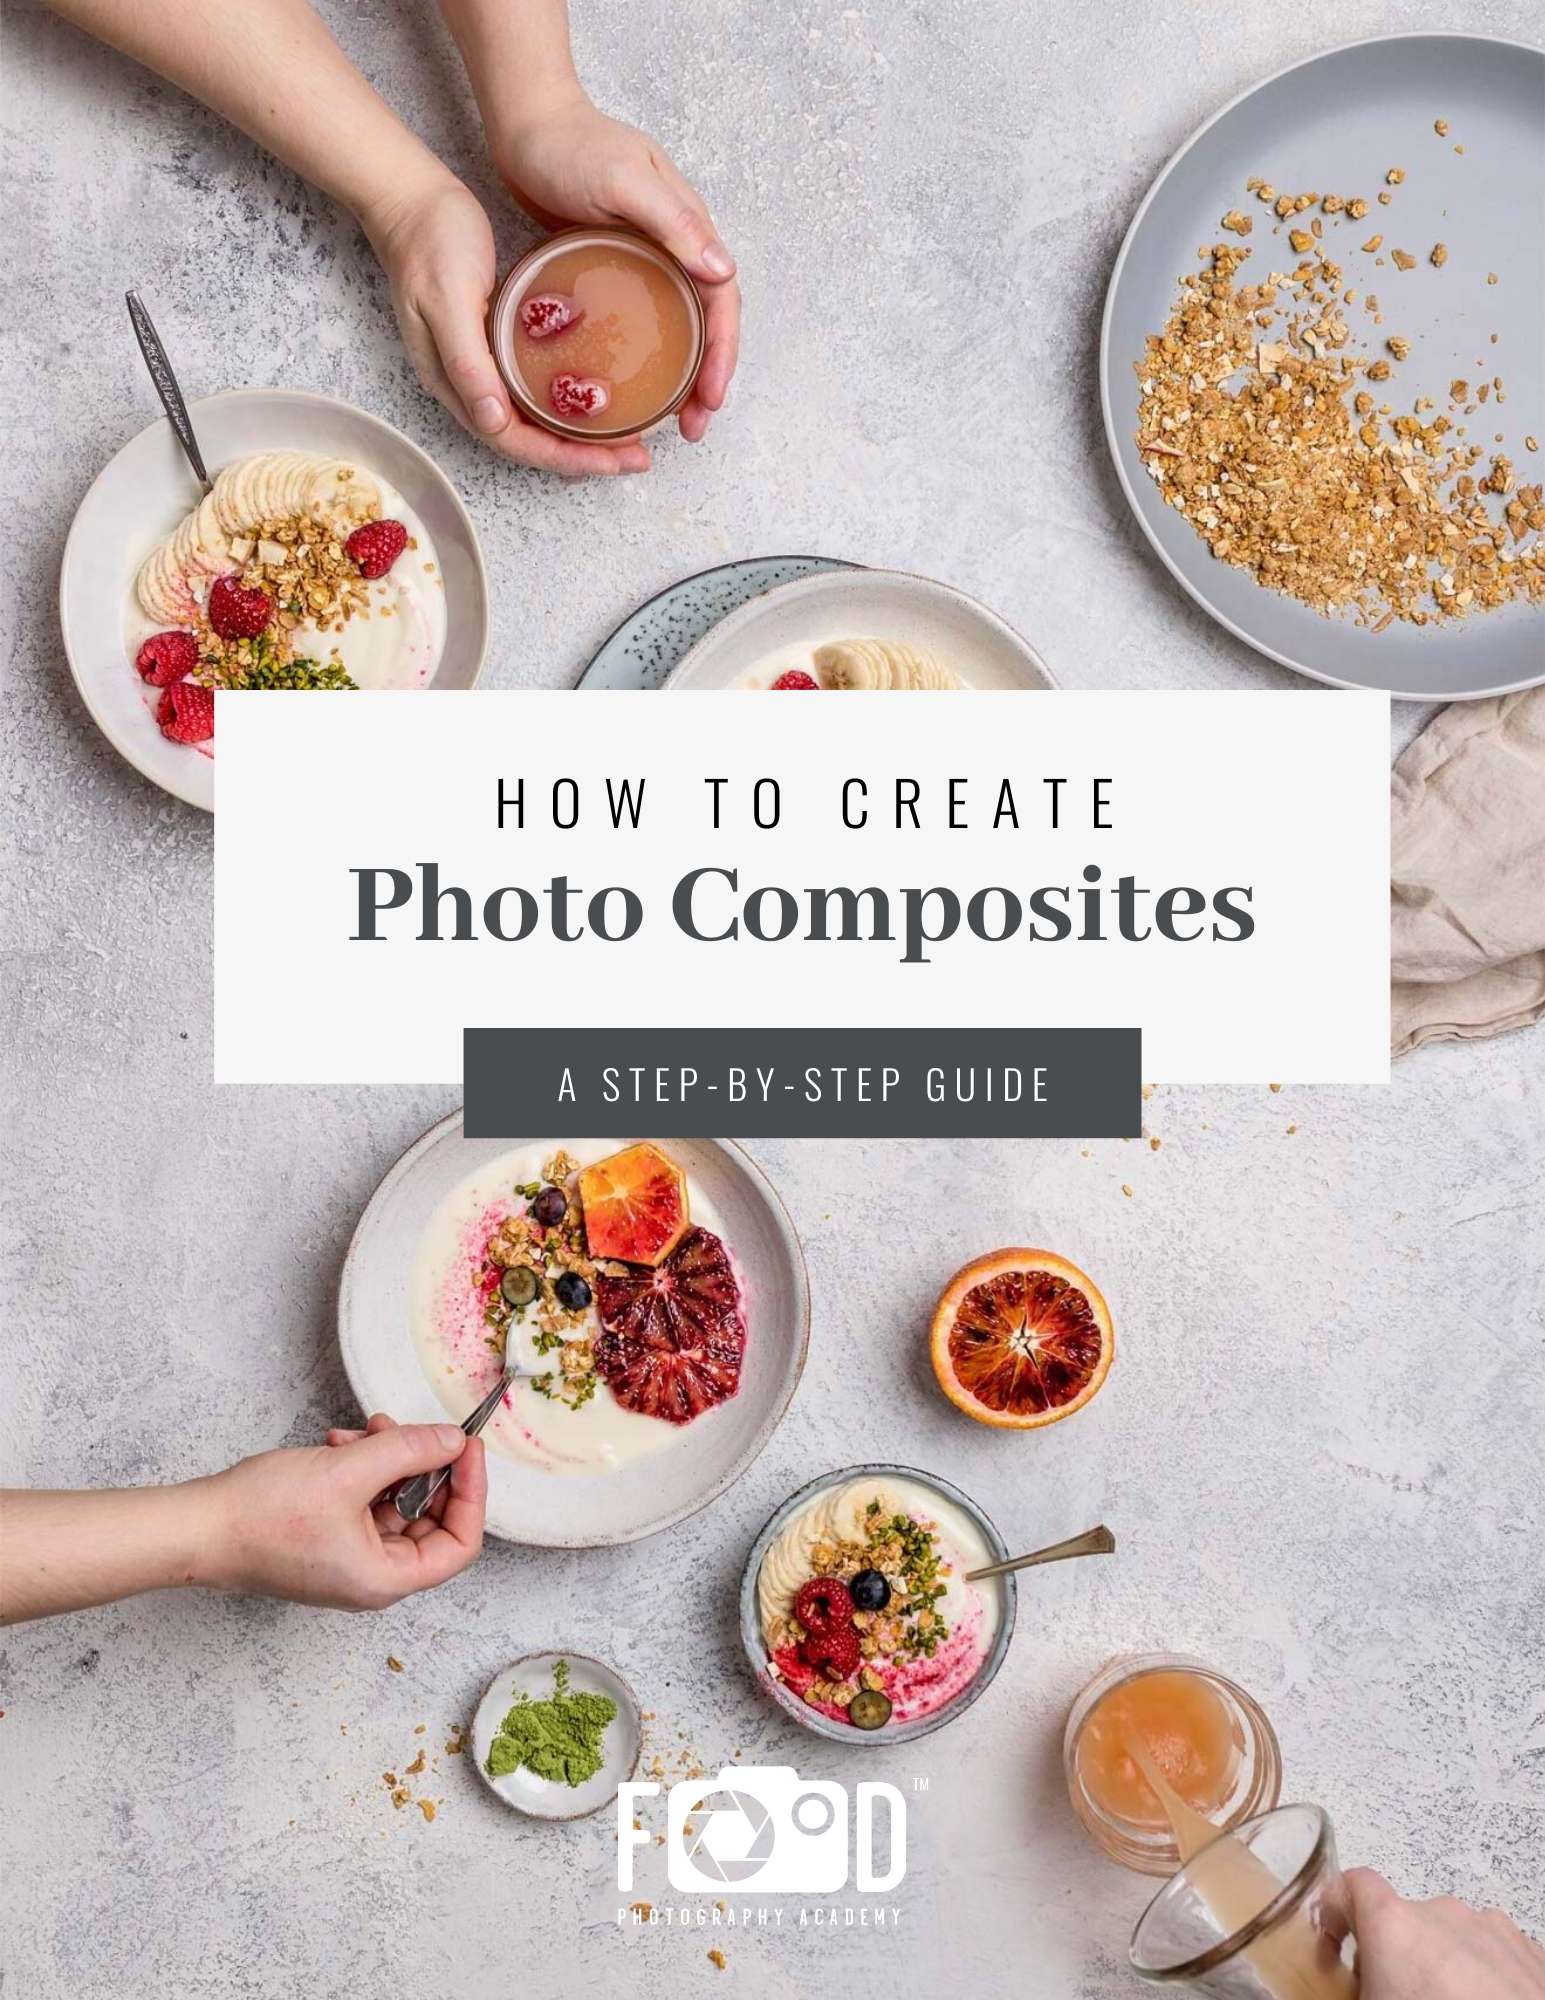 Step by Step Photoshop Composites Guide